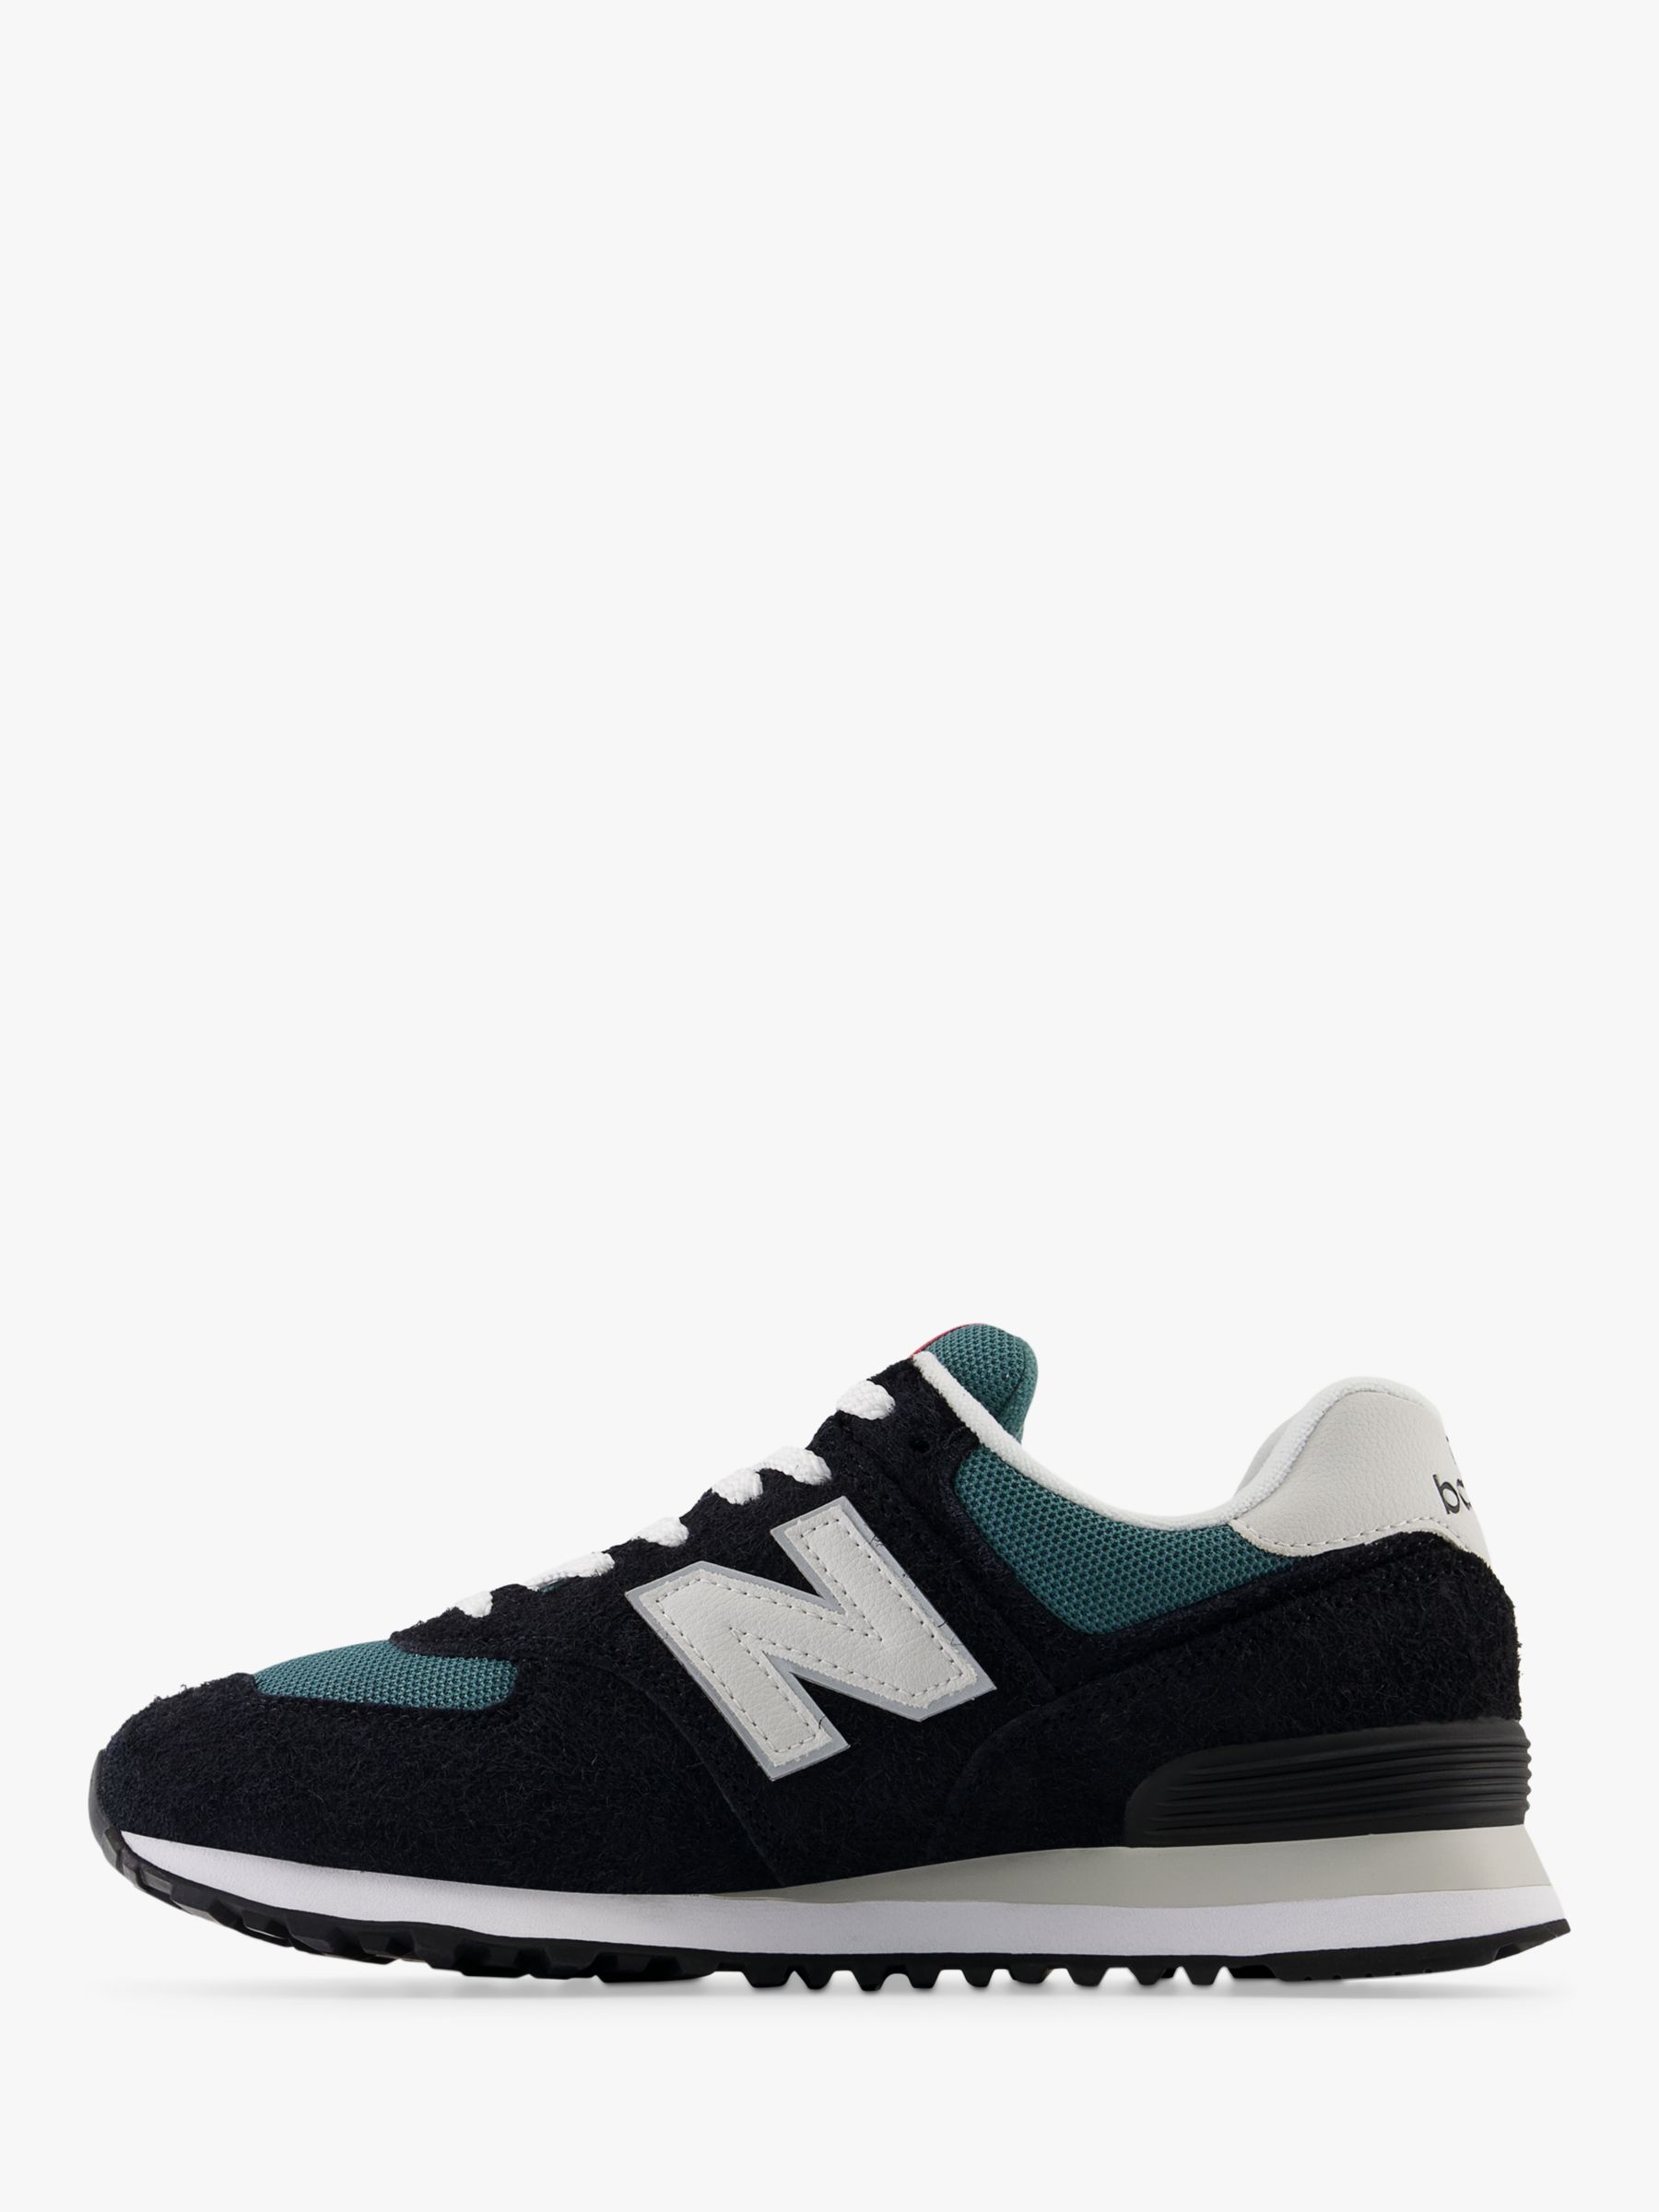 New Balance 574 Suede Trainers, Black/Blue, 7